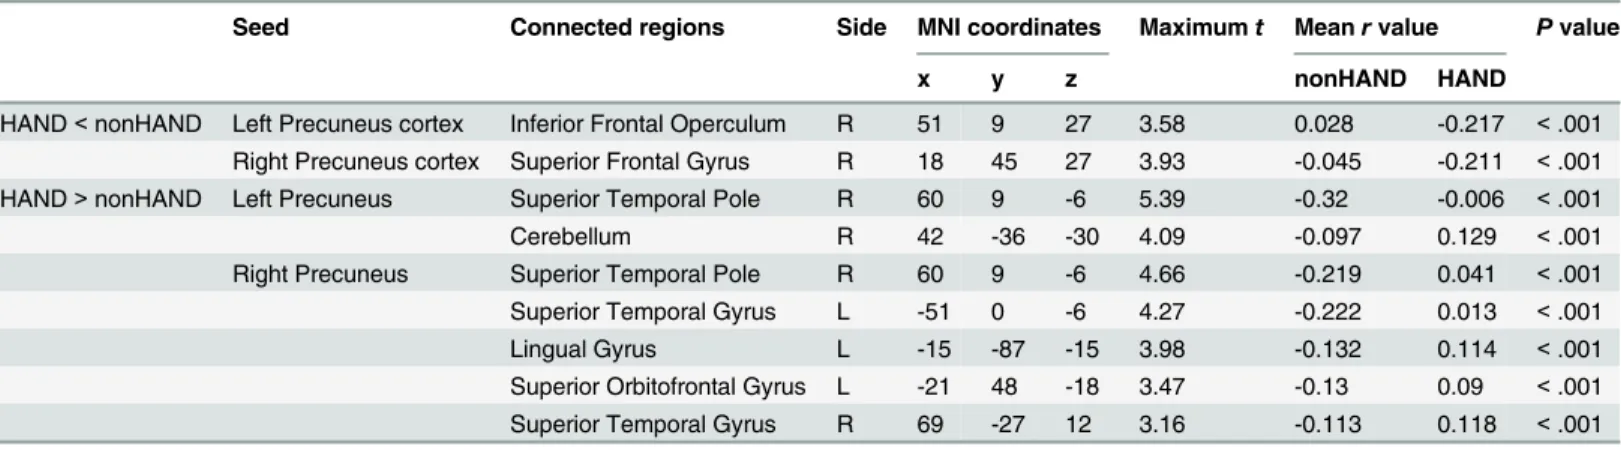 Table 3. Decreased resting state functional connectivity in HAND group compared to nonHAND group.